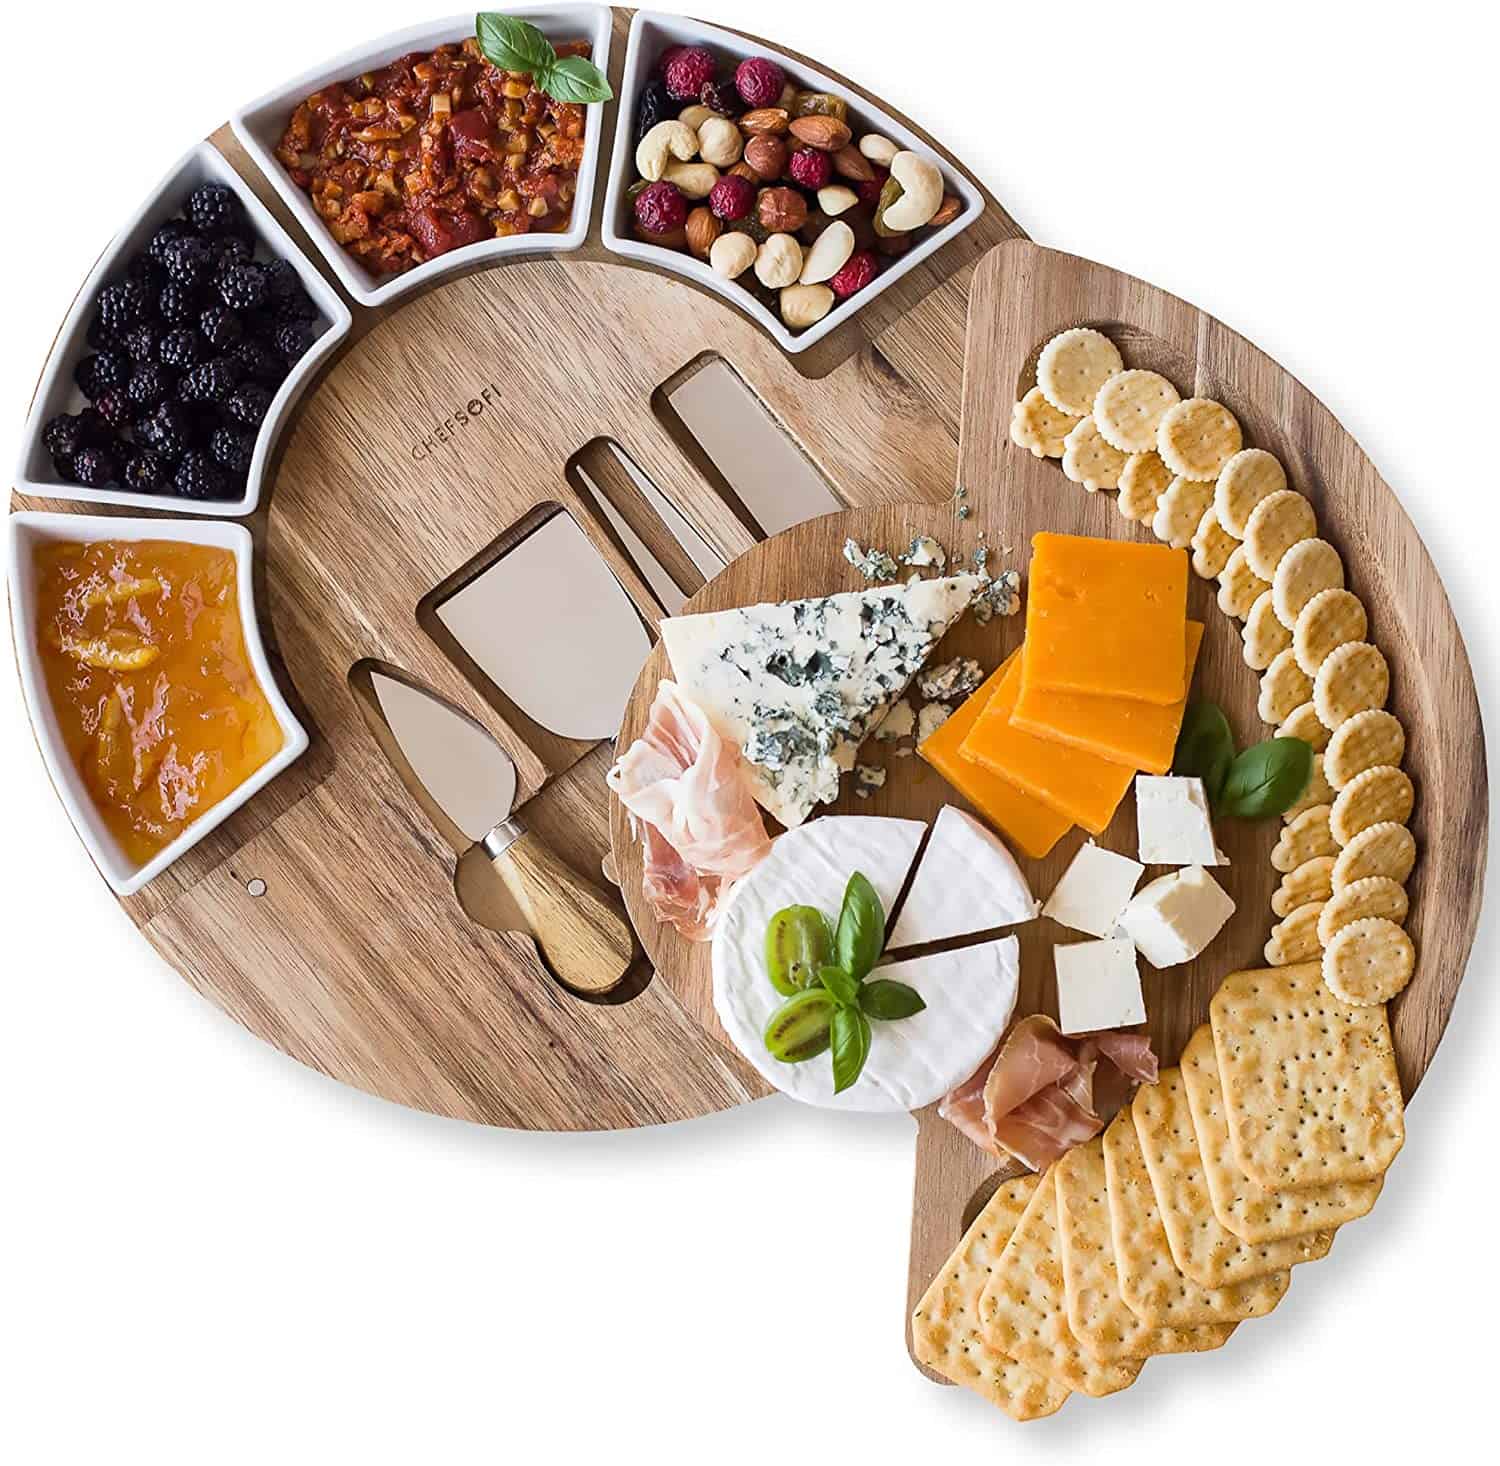 Cheese Board Set - mothers day gifts for girlfriend